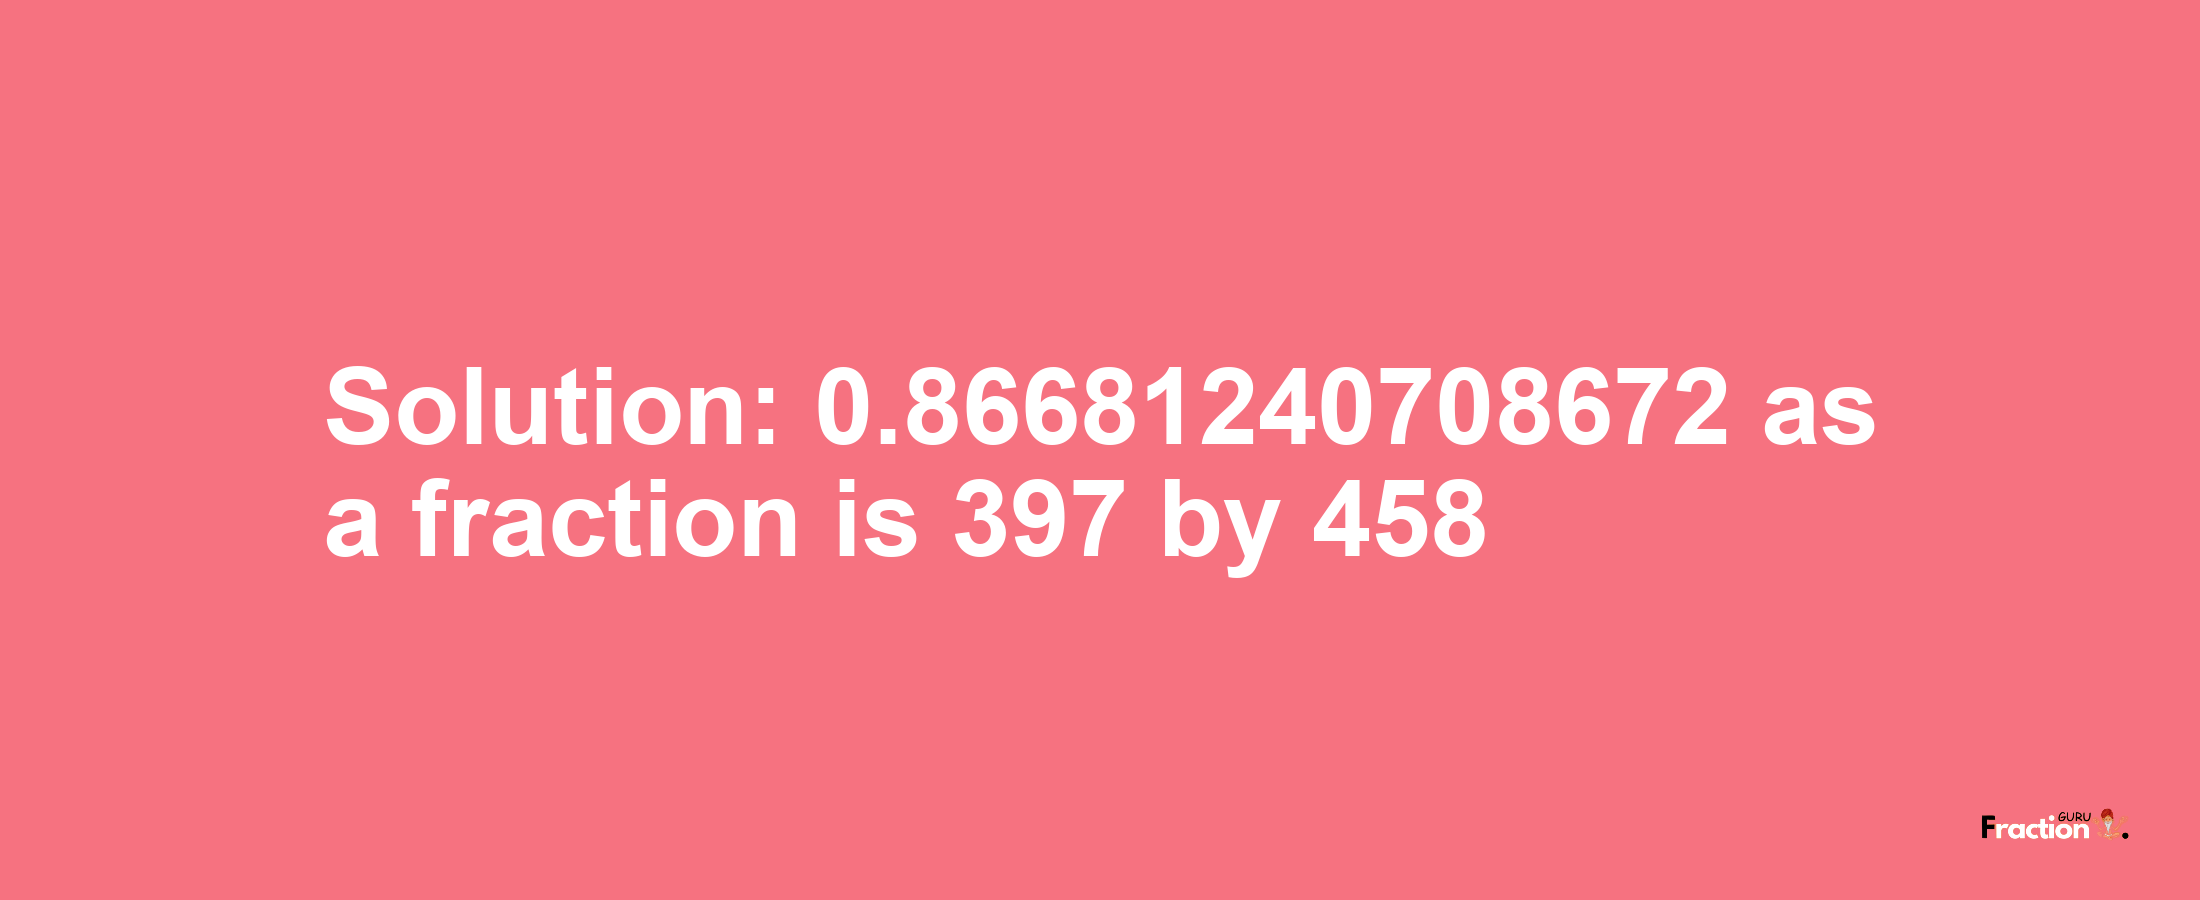 Solution:0.86681240708672 as a fraction is 397/458